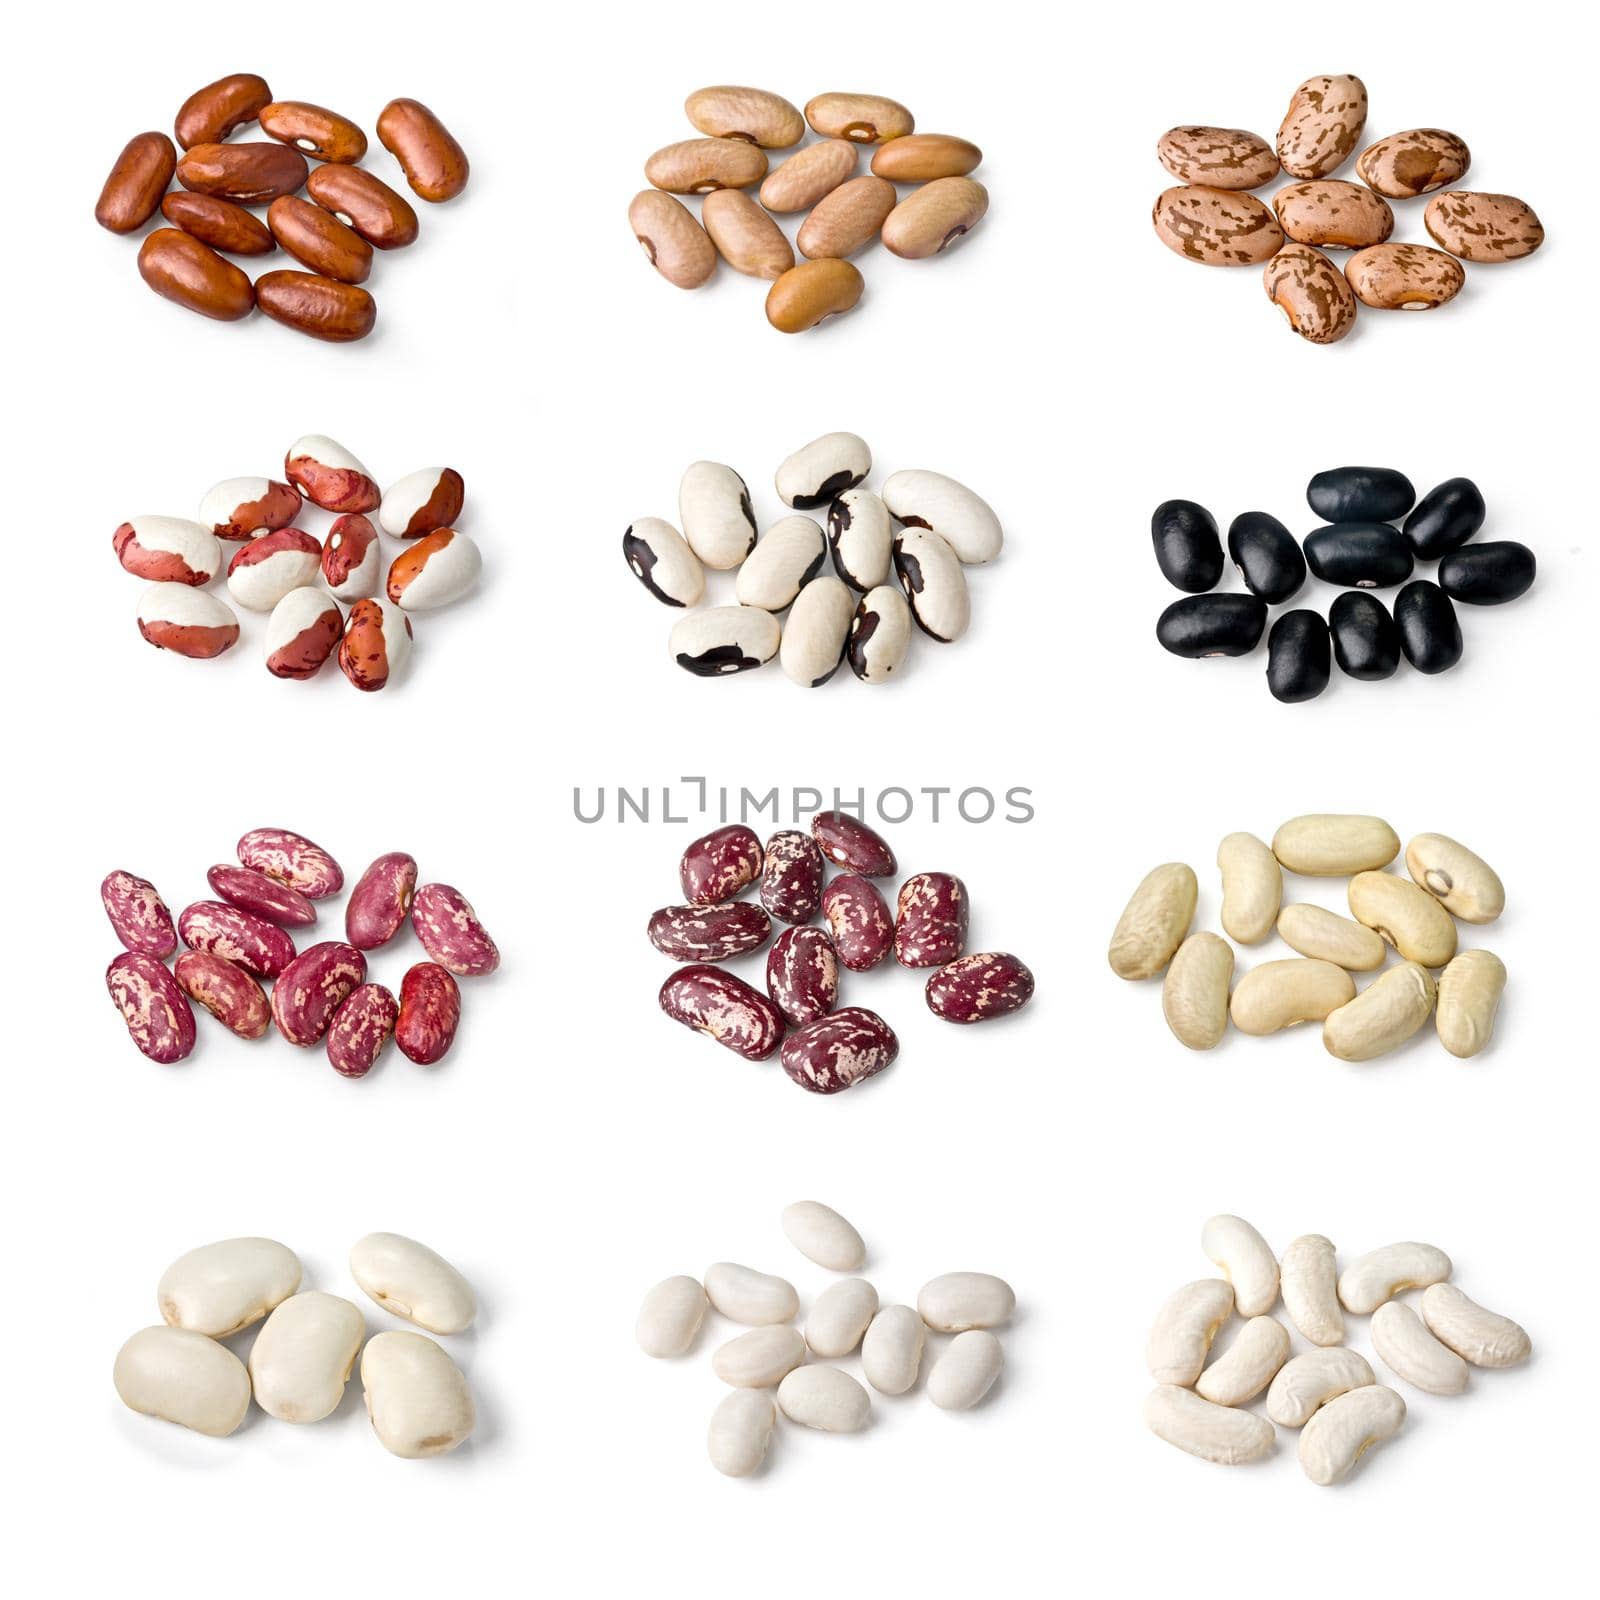 collection of different beans isolated on white background